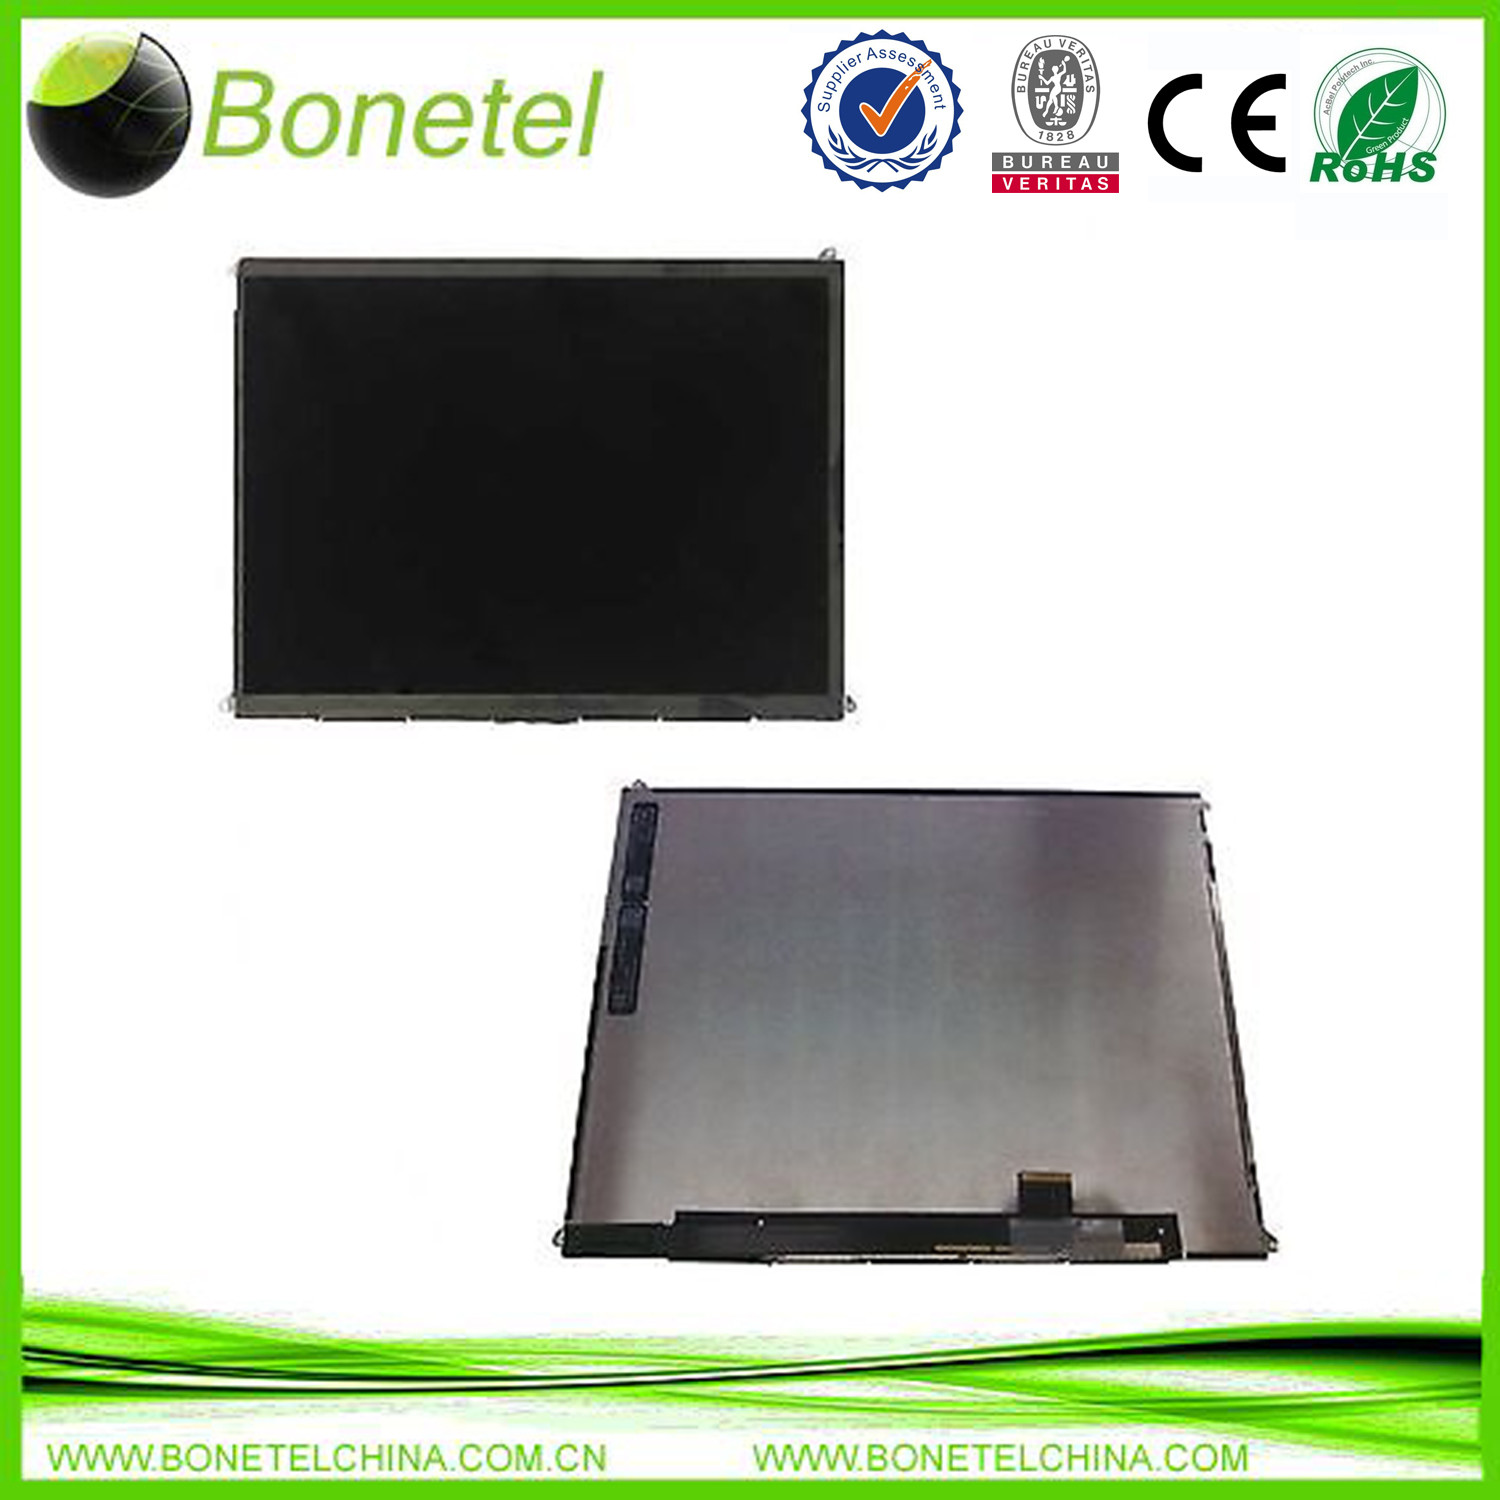 New LCD Screen Display Replacement Part for Apple iPad 3 iPad 4 3rd 4th Gen 3G